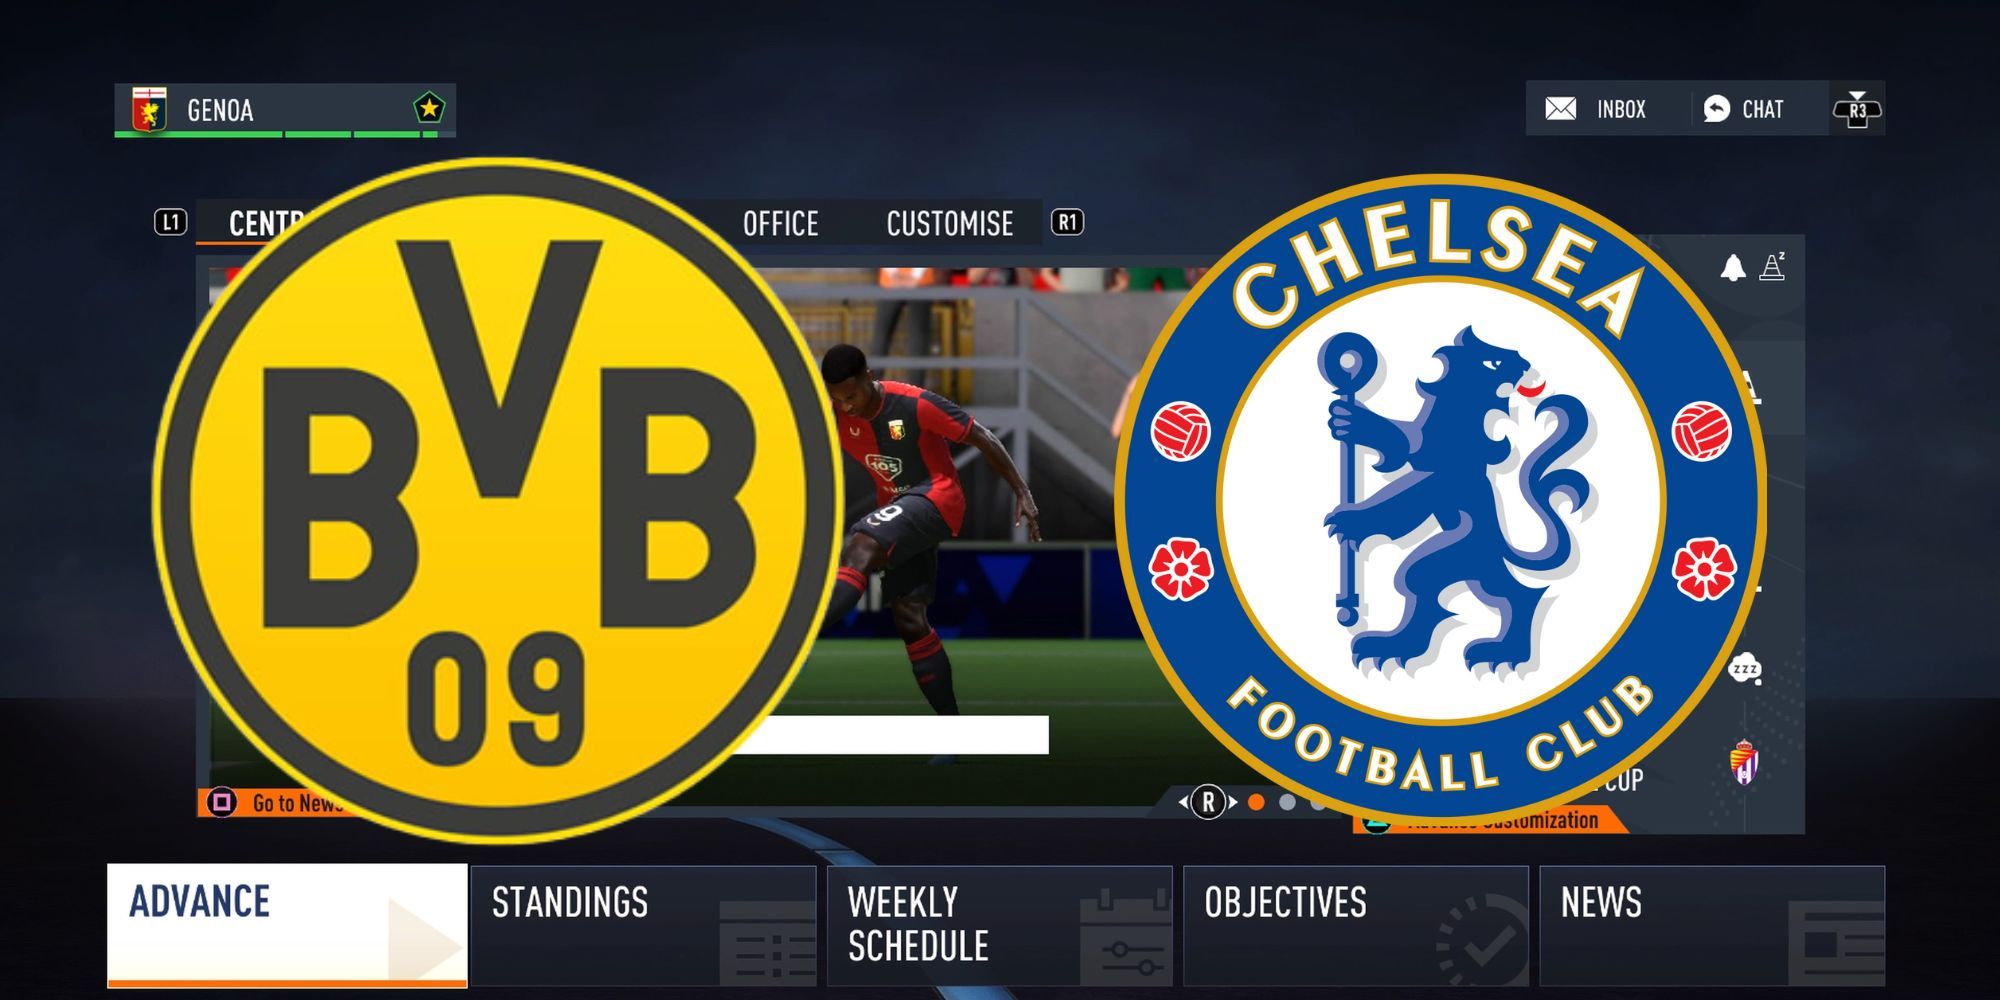 The home menu for FIFA 23 career mode with the Borussia Dortmund and Chelsea logos superimposed